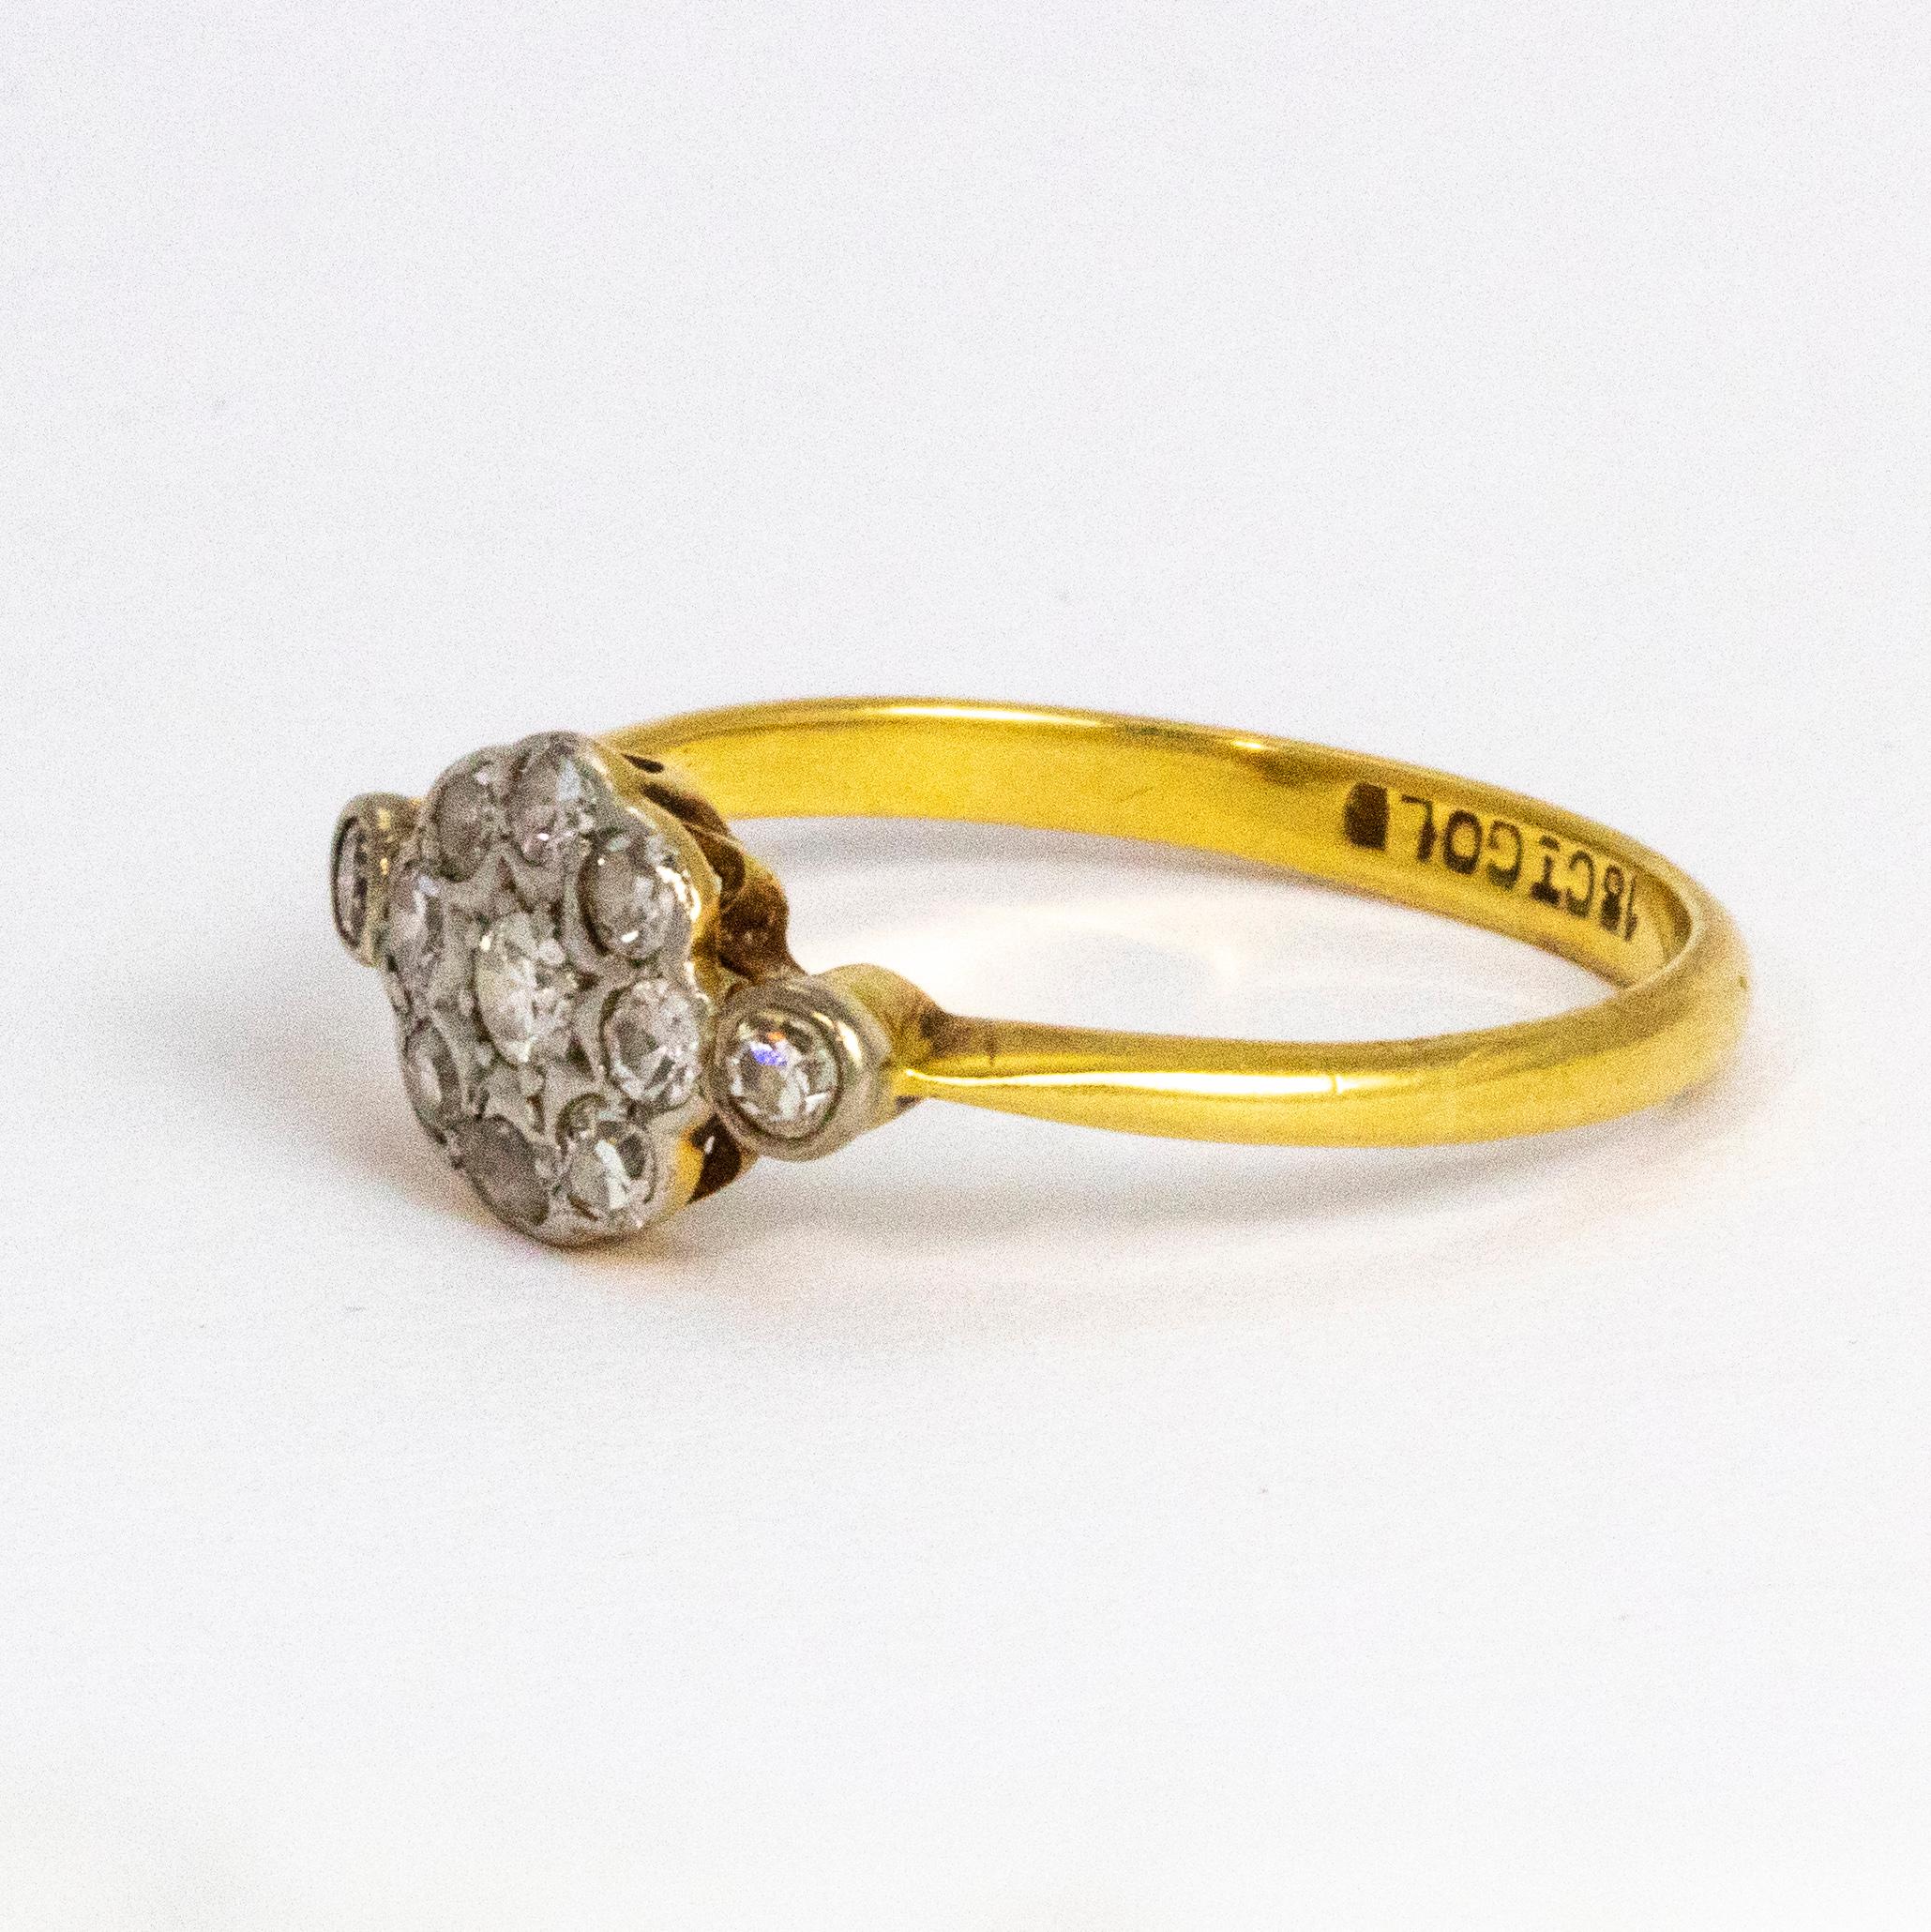 Charming diamond cluster ring holding a sparkling 10pt centre stone surrounded by a halo of eight .05pt diamonds and two .05pt diamond shoulders. Ring modelled in 18ct gold.

Ring Size: P 1/2 or 7 3/4